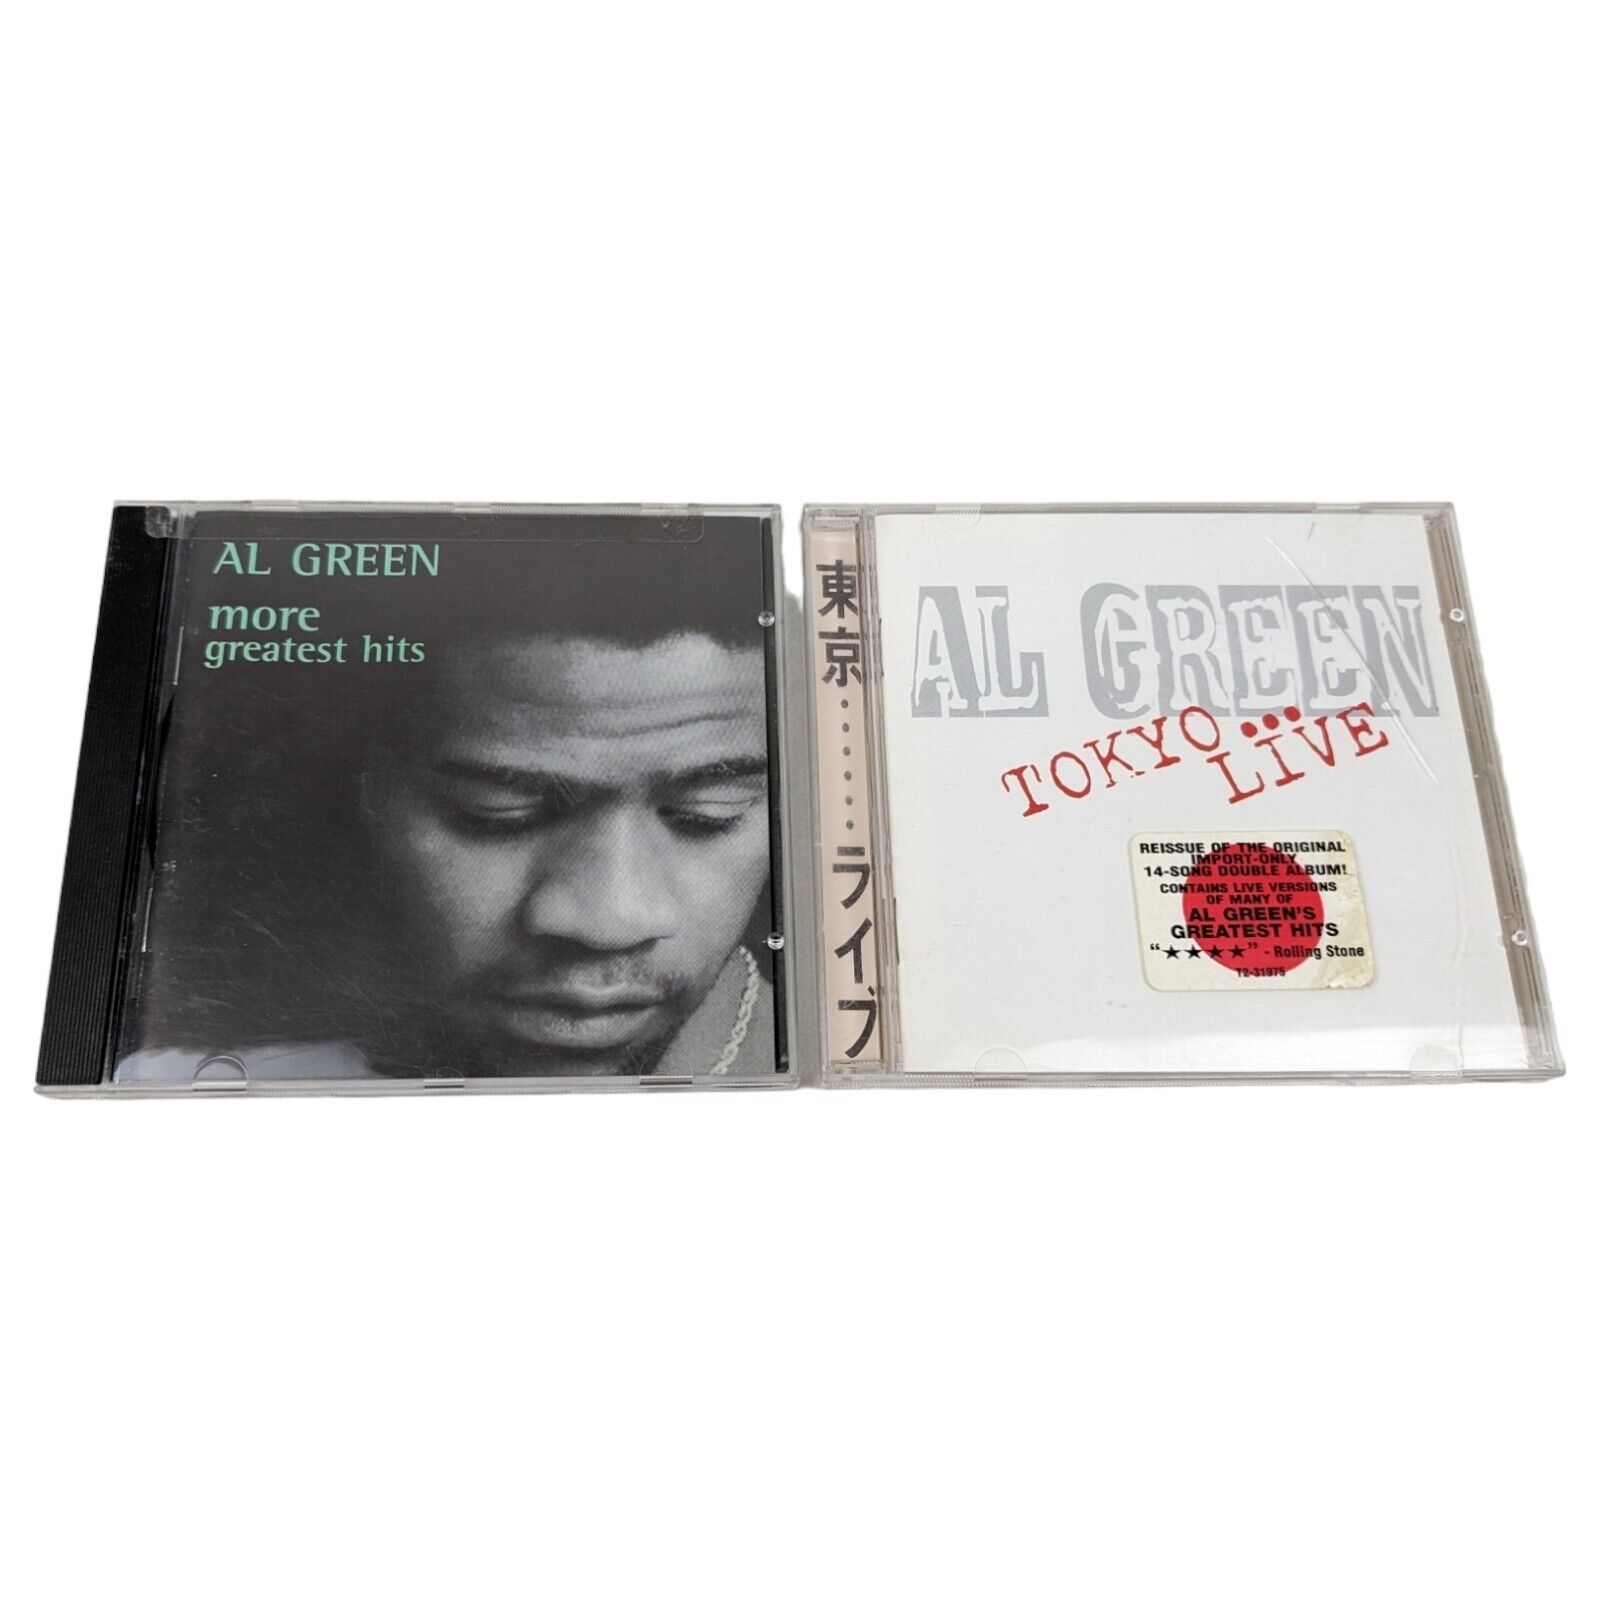 Al Green - More Greatest Hits and Tokyo Live - CD Lot of 2